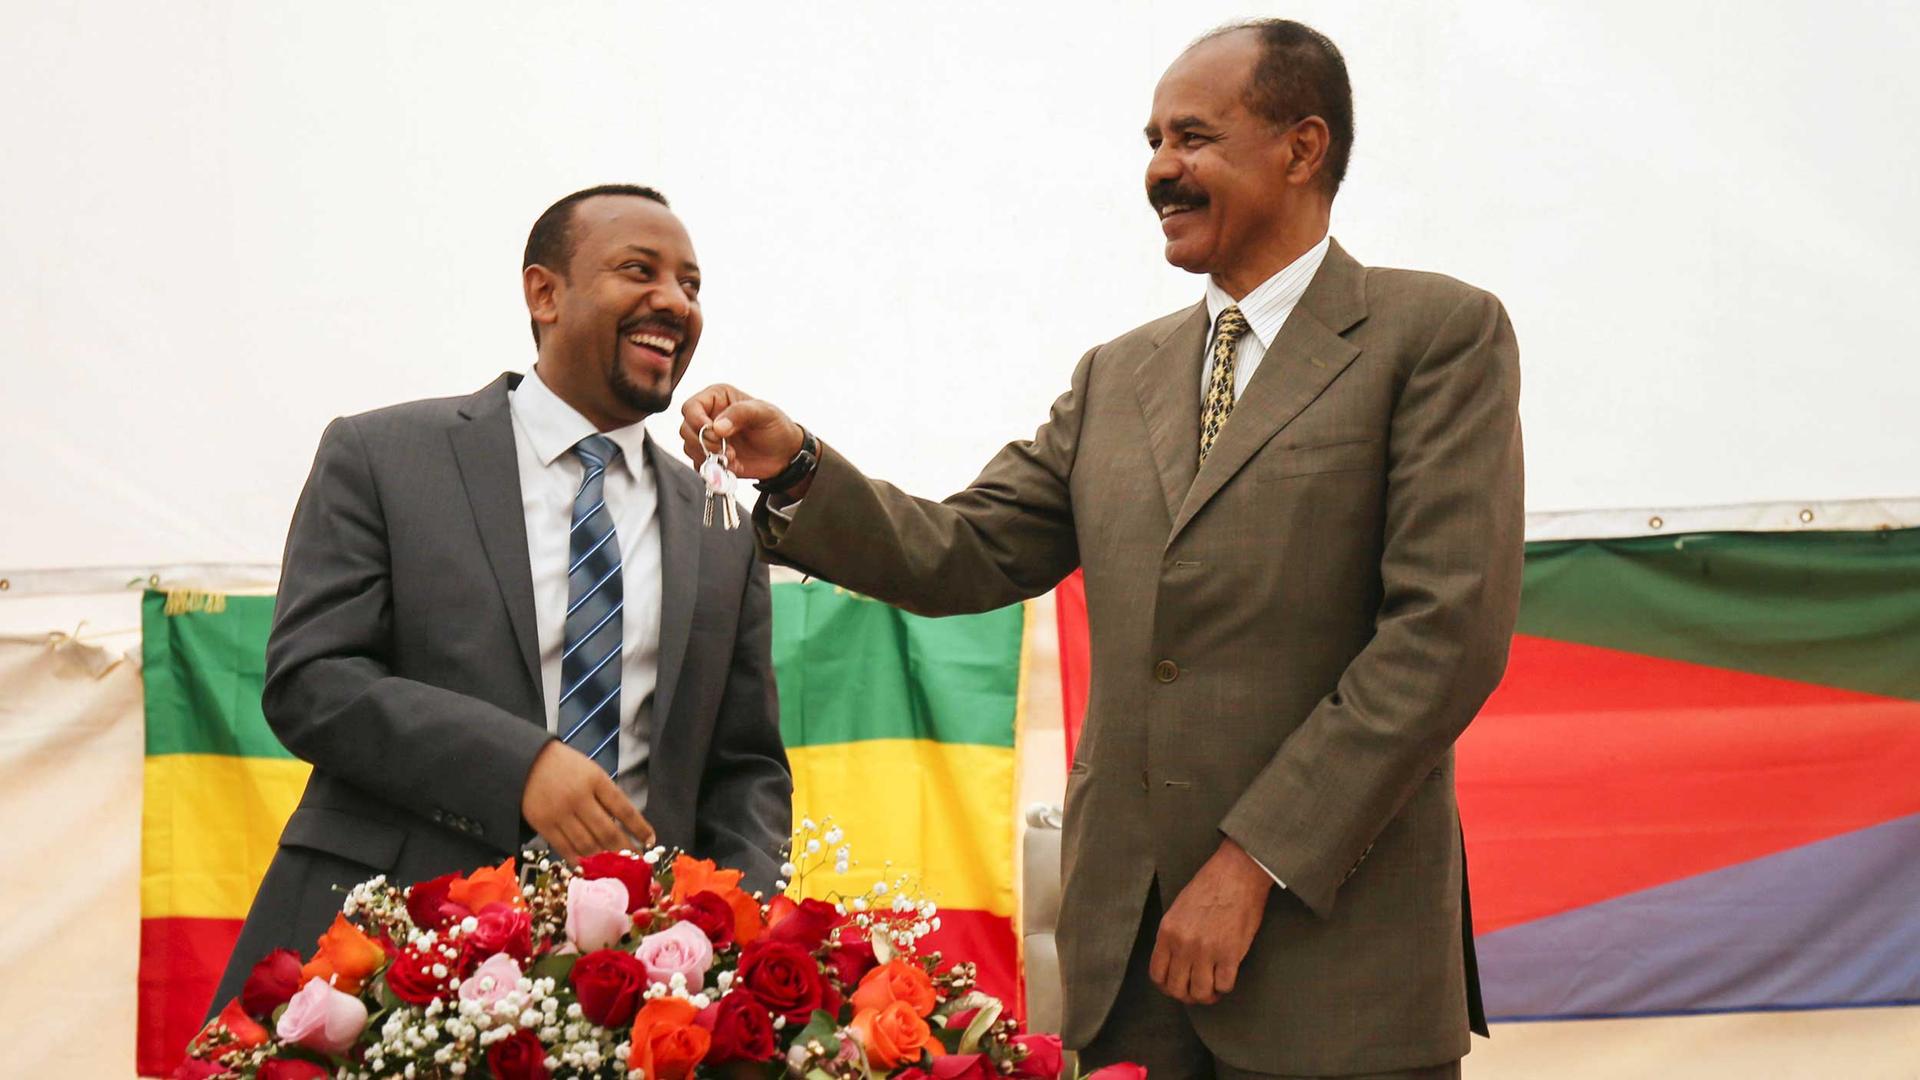 A man smiles as another man dangles keys from his hand. Behind the pair are the flags of Ethiopia and Eritrea.